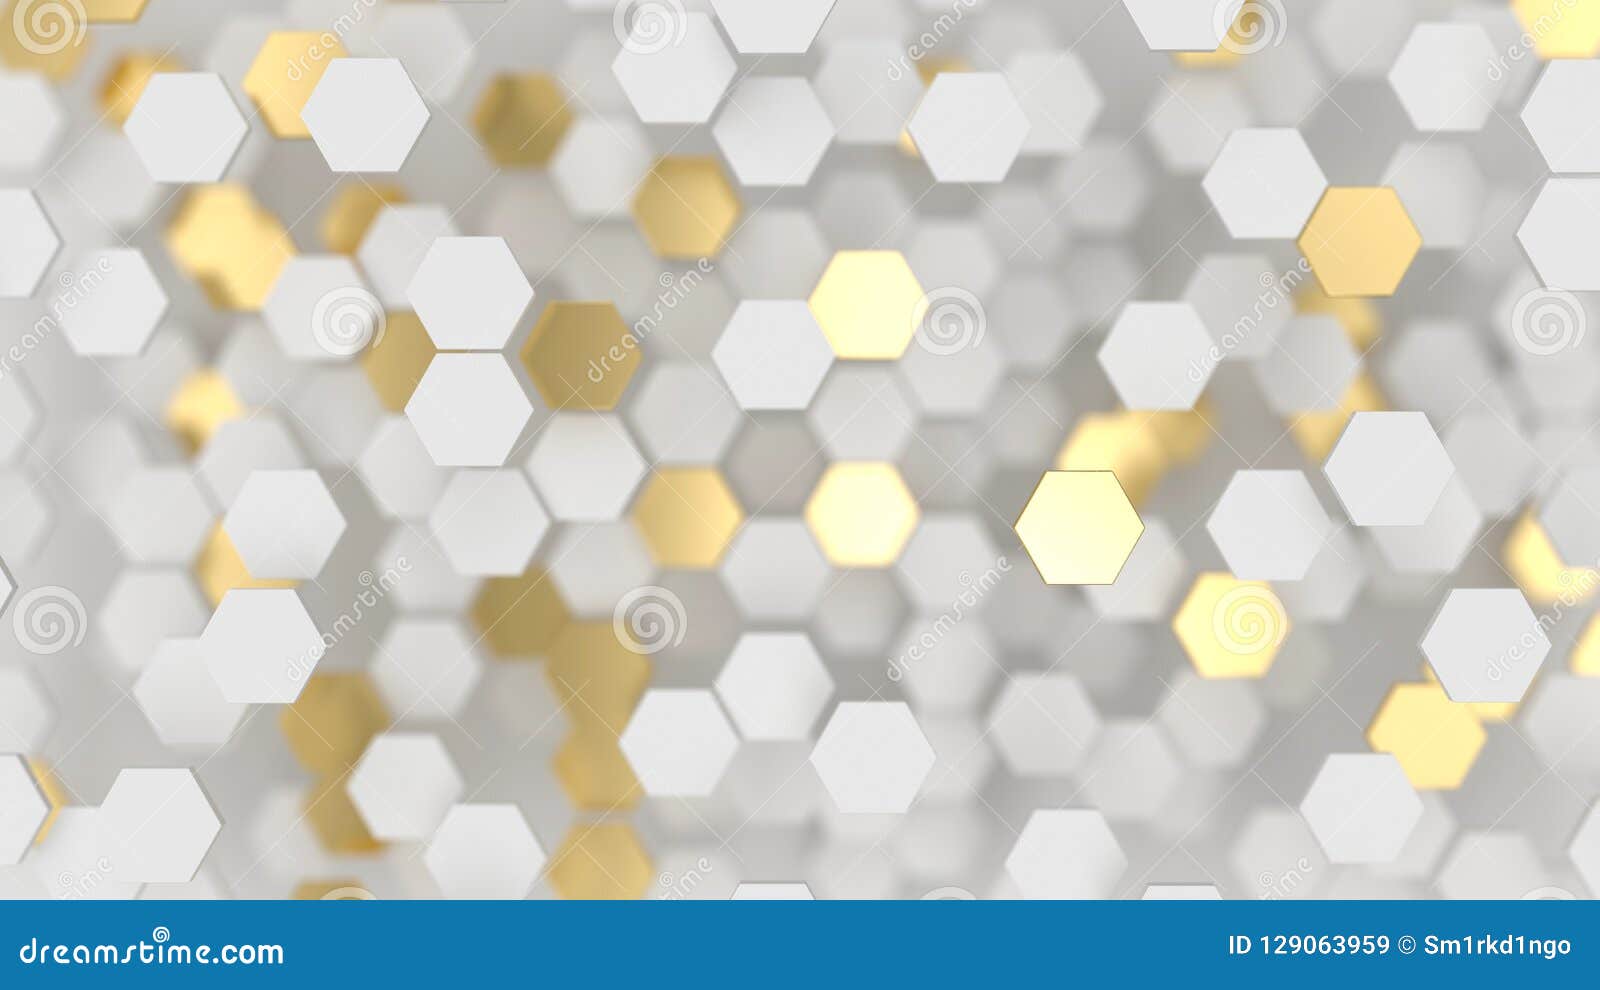 abstract lux background with white and gold 3d hexagons